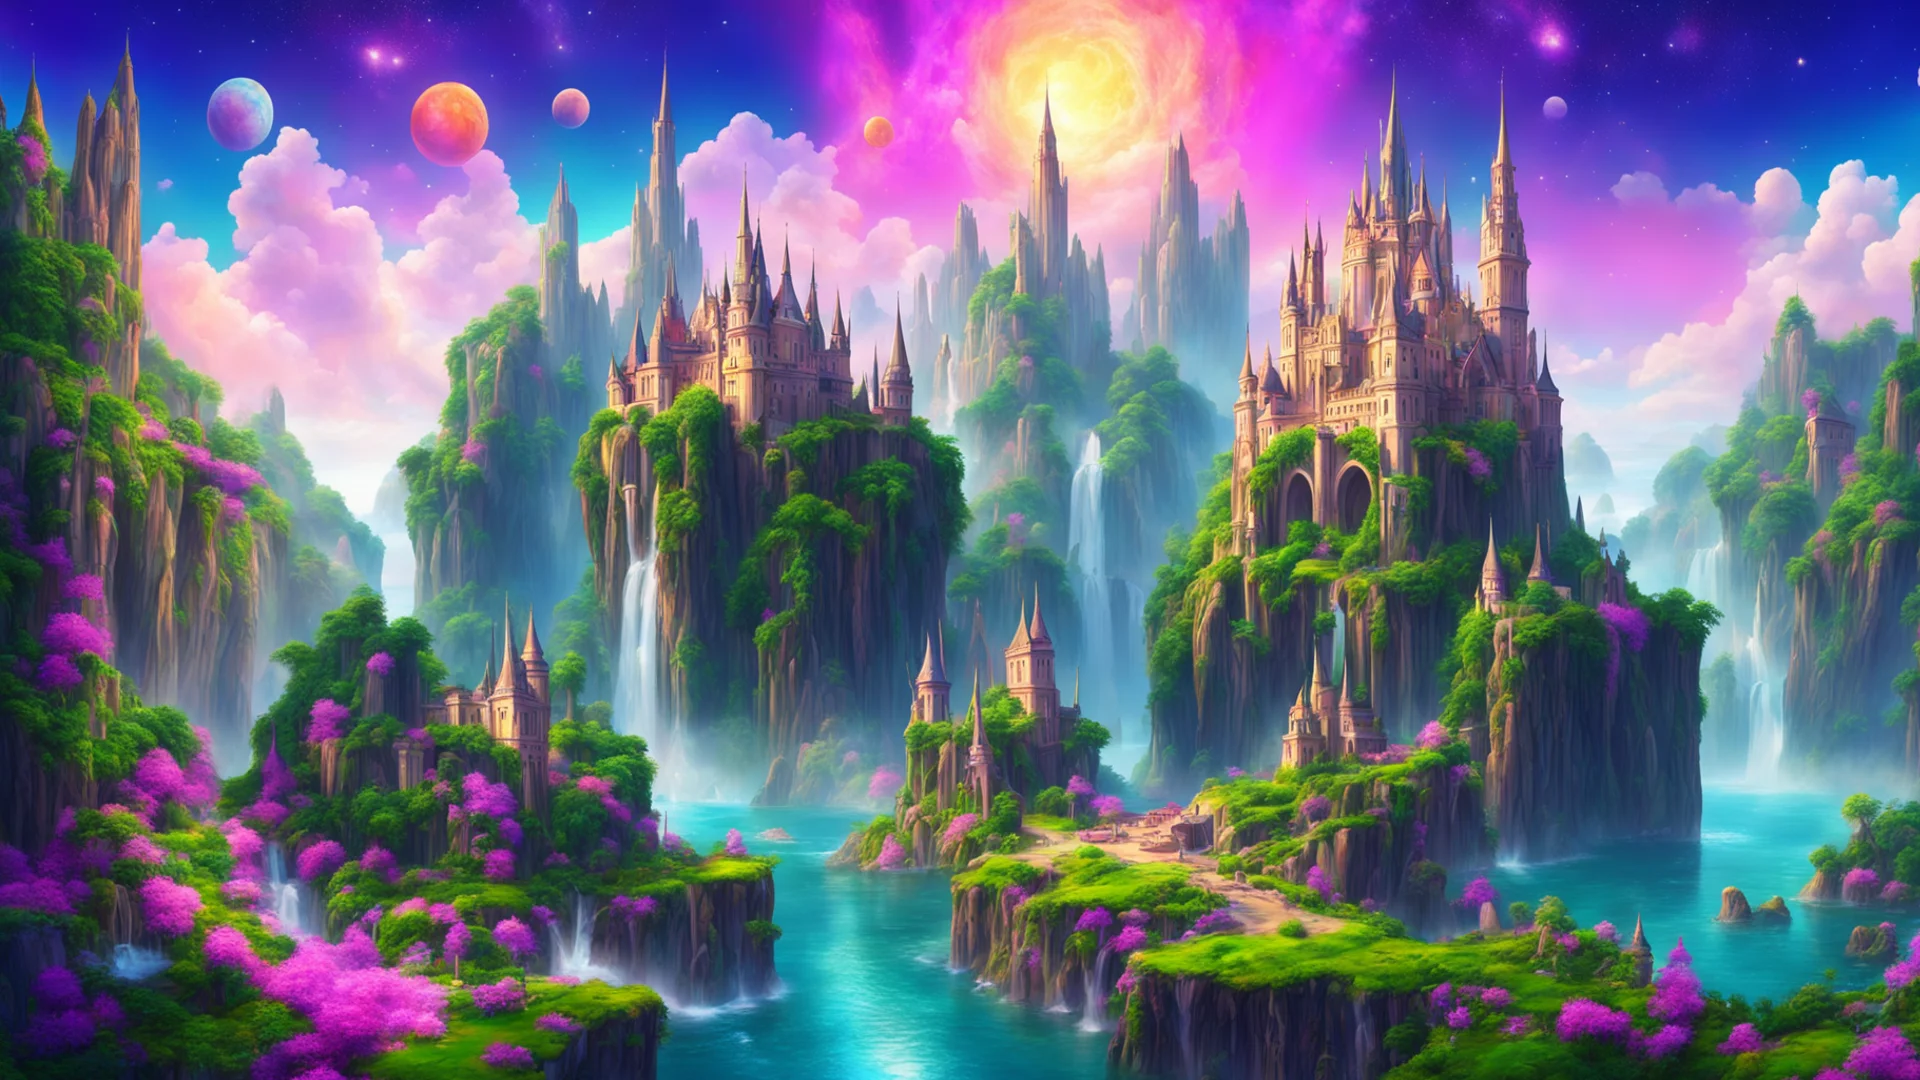 fantasy landscape colorful palace royal cathedrals on cliffs islands relaxing stary ethereal sky realistic planets high circle colorful earth like  waterfall amazing awesome portrait 2 wide